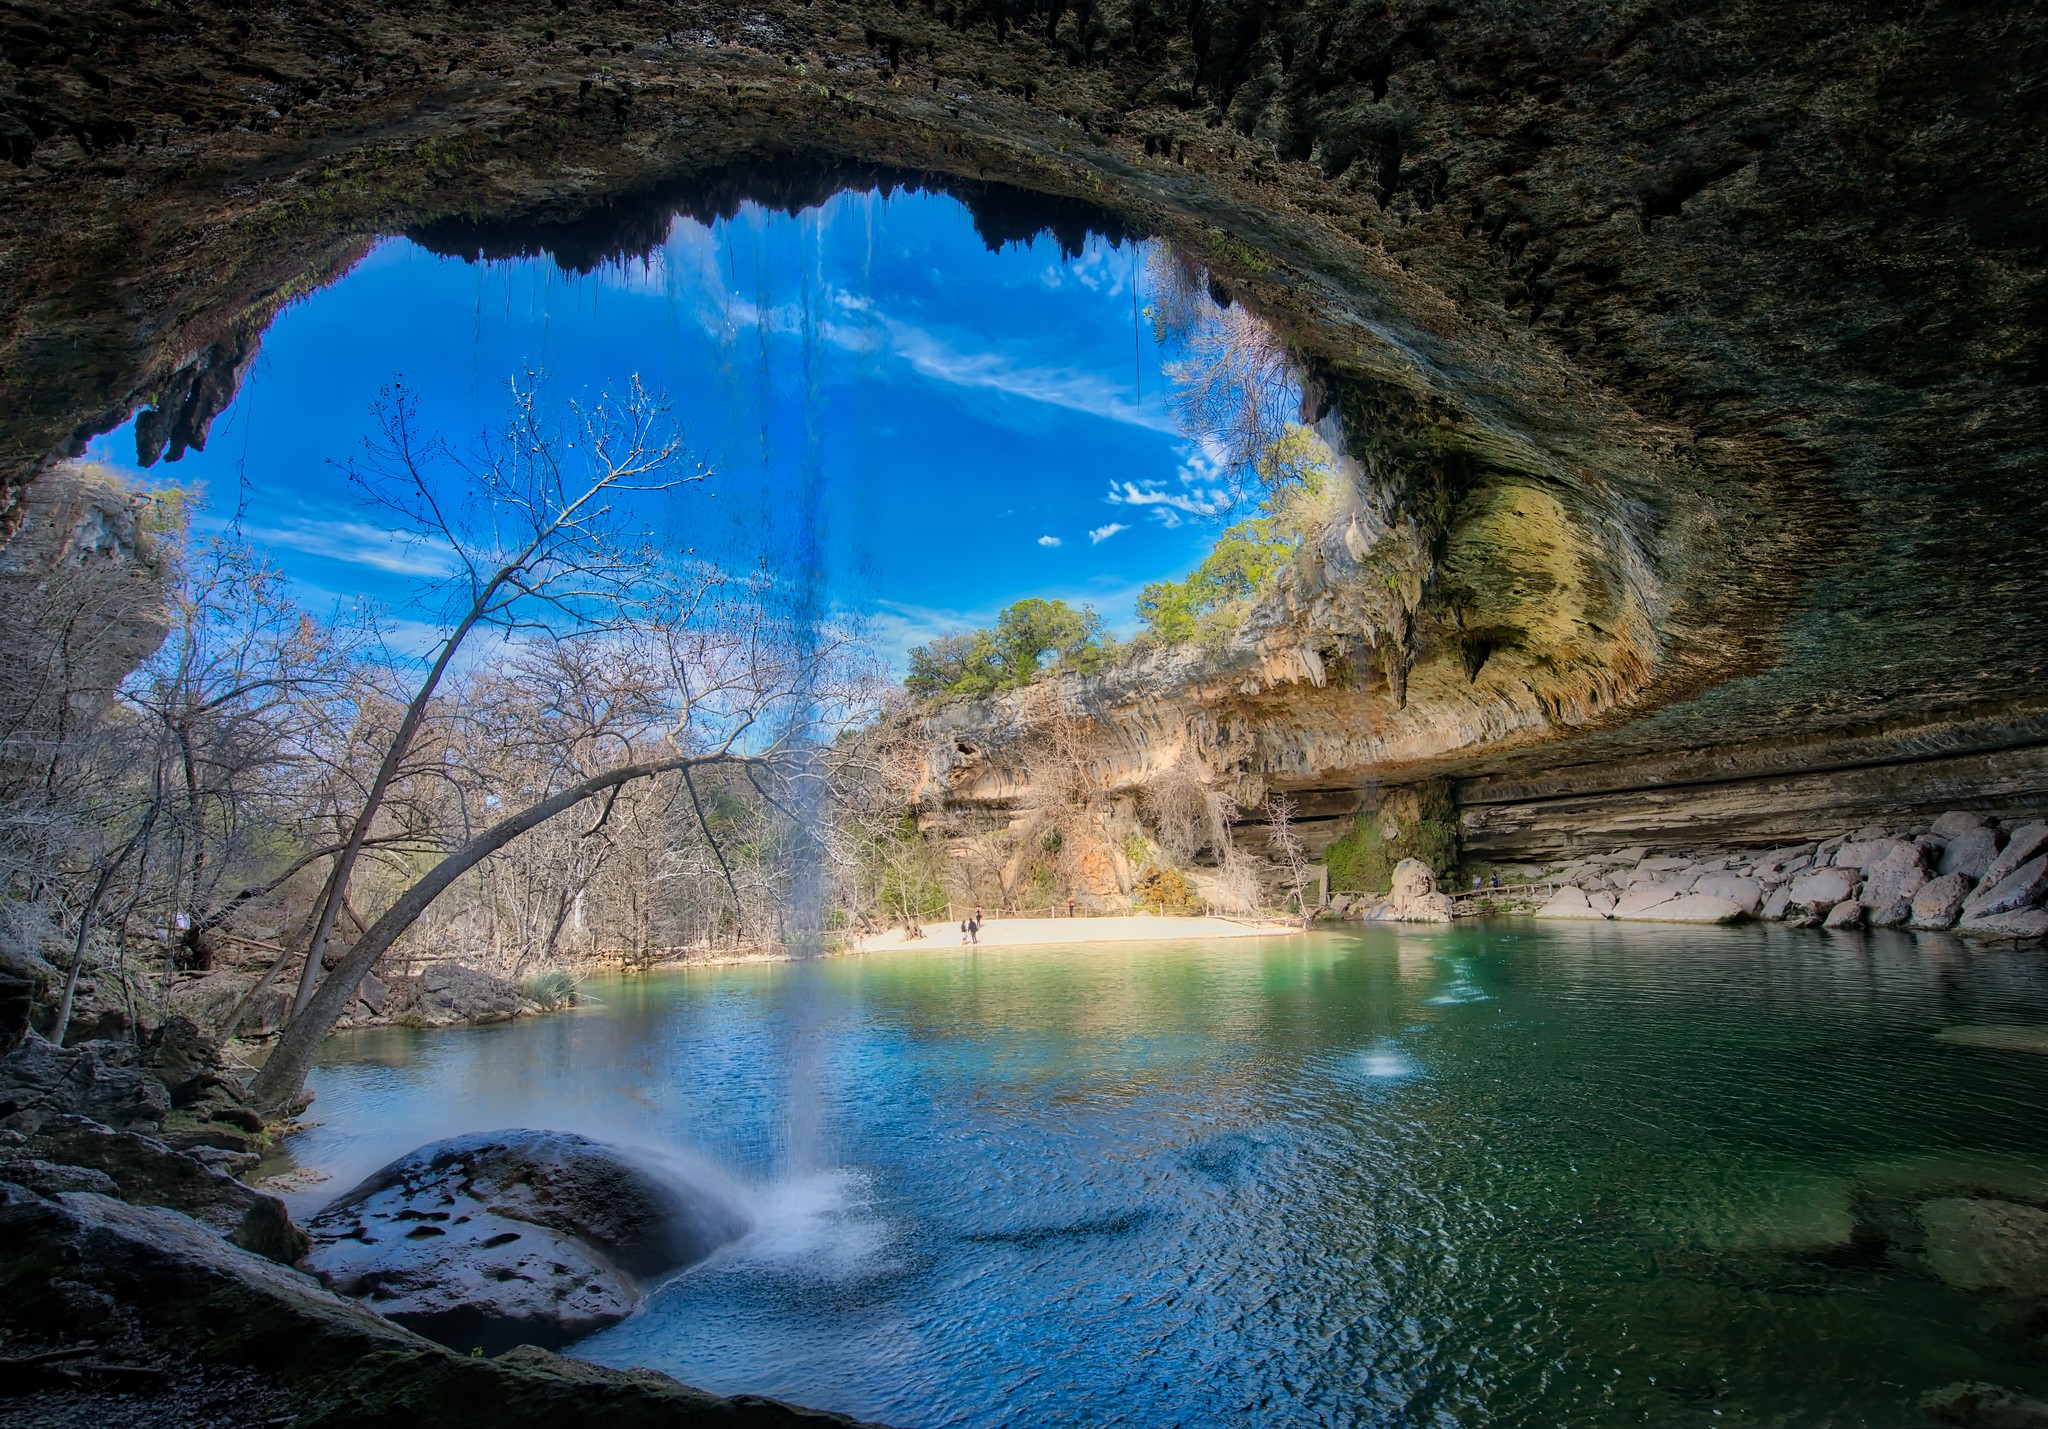 Hamilton Pool In Texas Was Named The Most Beautiful In The State